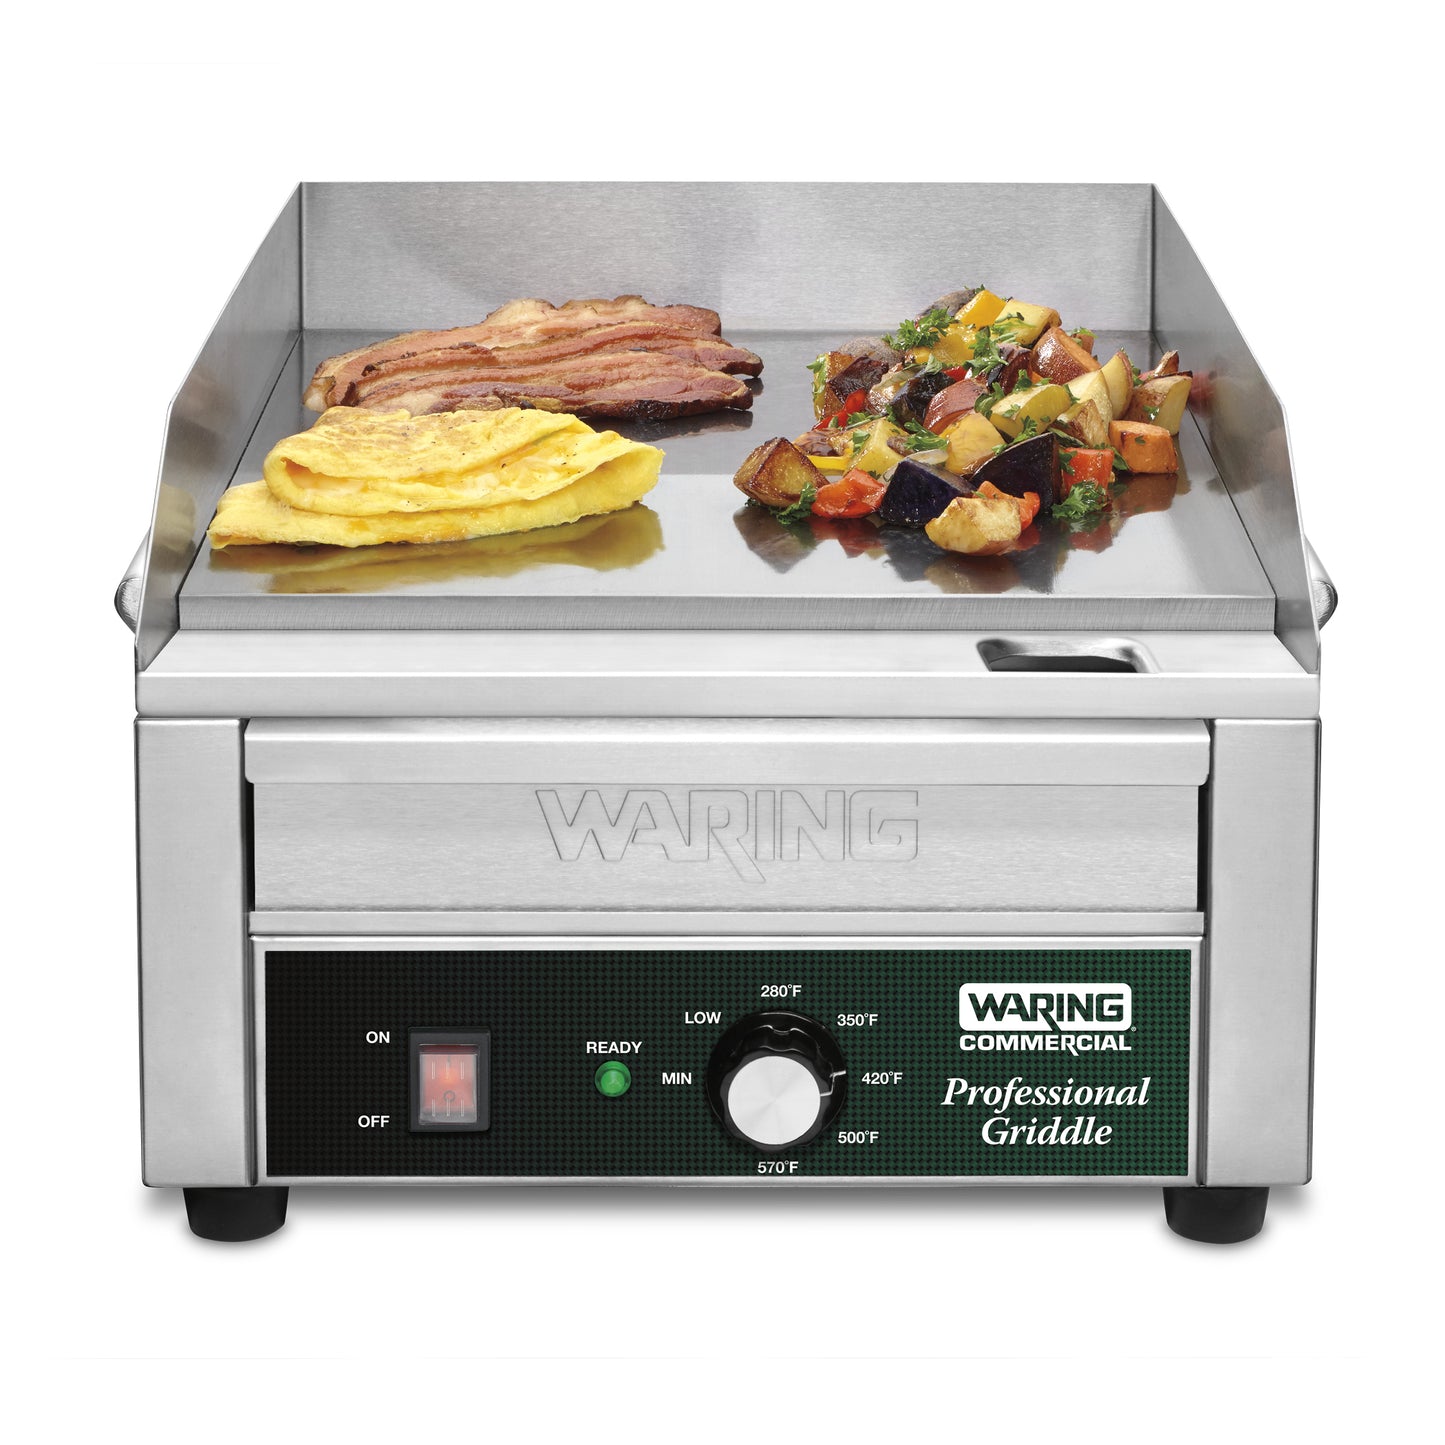 Waring WGR140X Countertop Electric Griddle — 120V, 1800W (14" x 16" cooking surface)